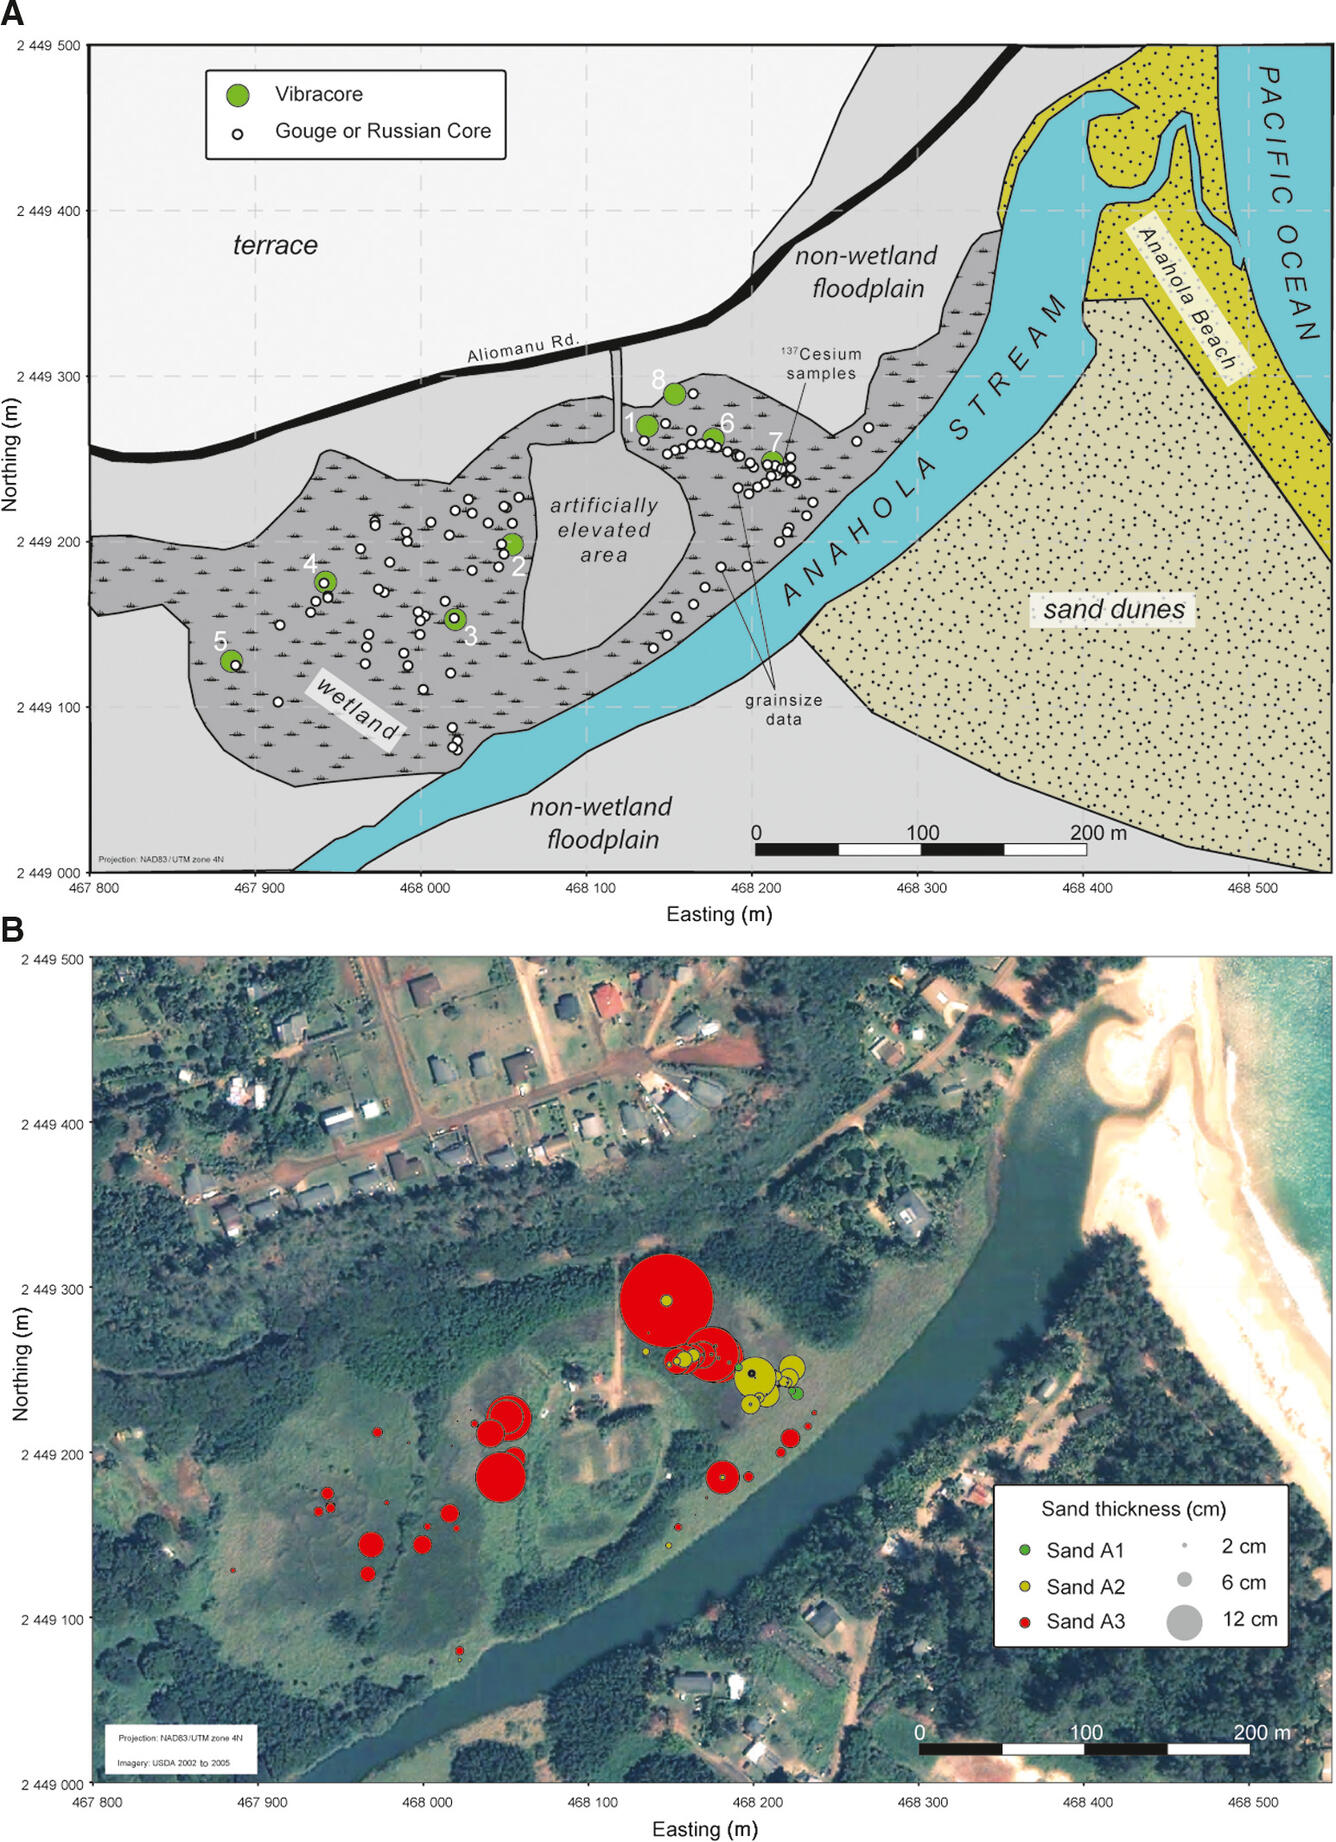 Bottom graphic shows view of river and beach from above, top graphic illustrates sediment in same area labeled.